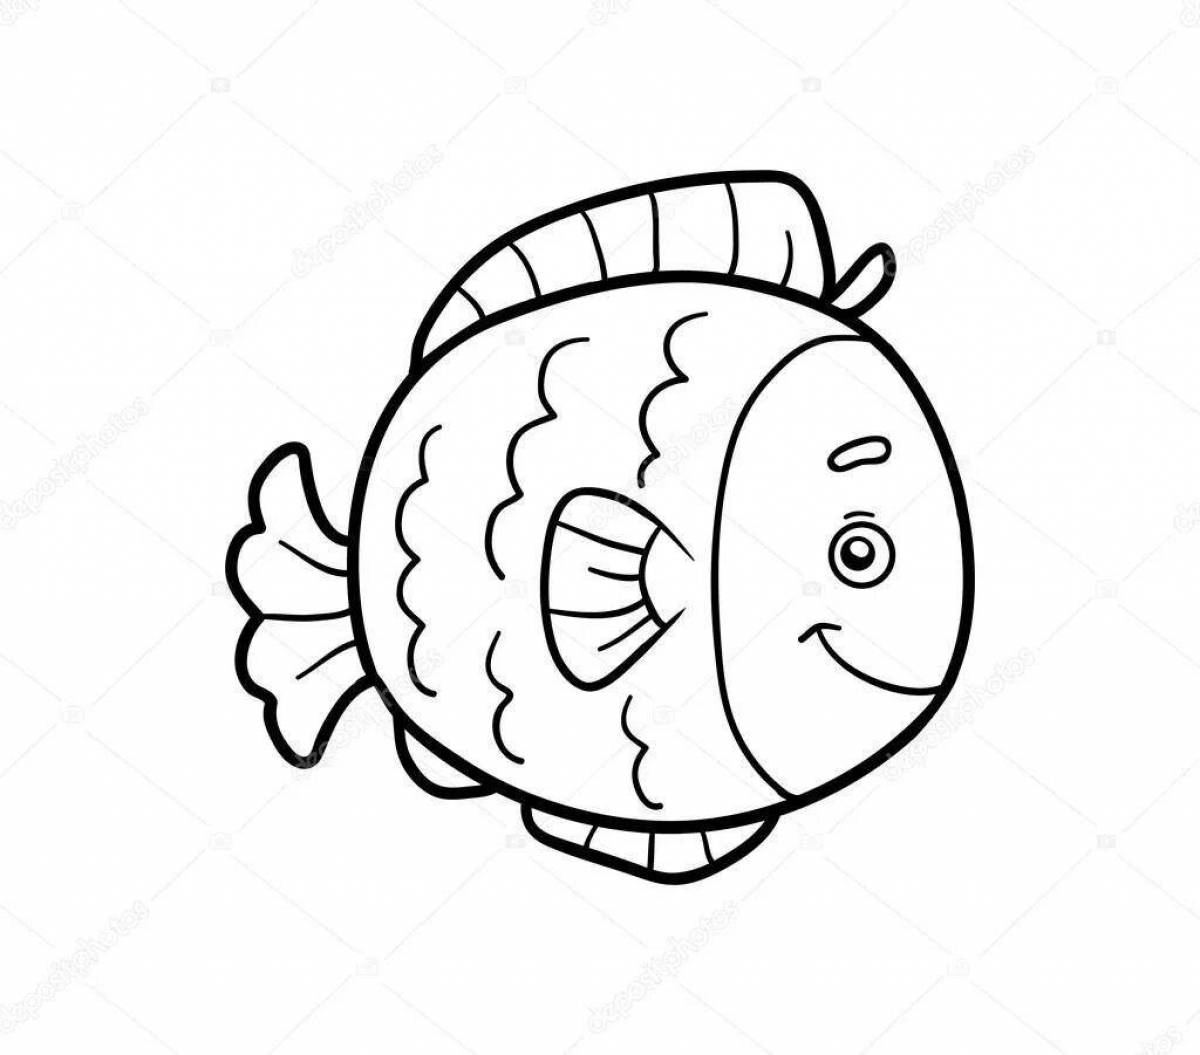 Coloring page adorable ball fish